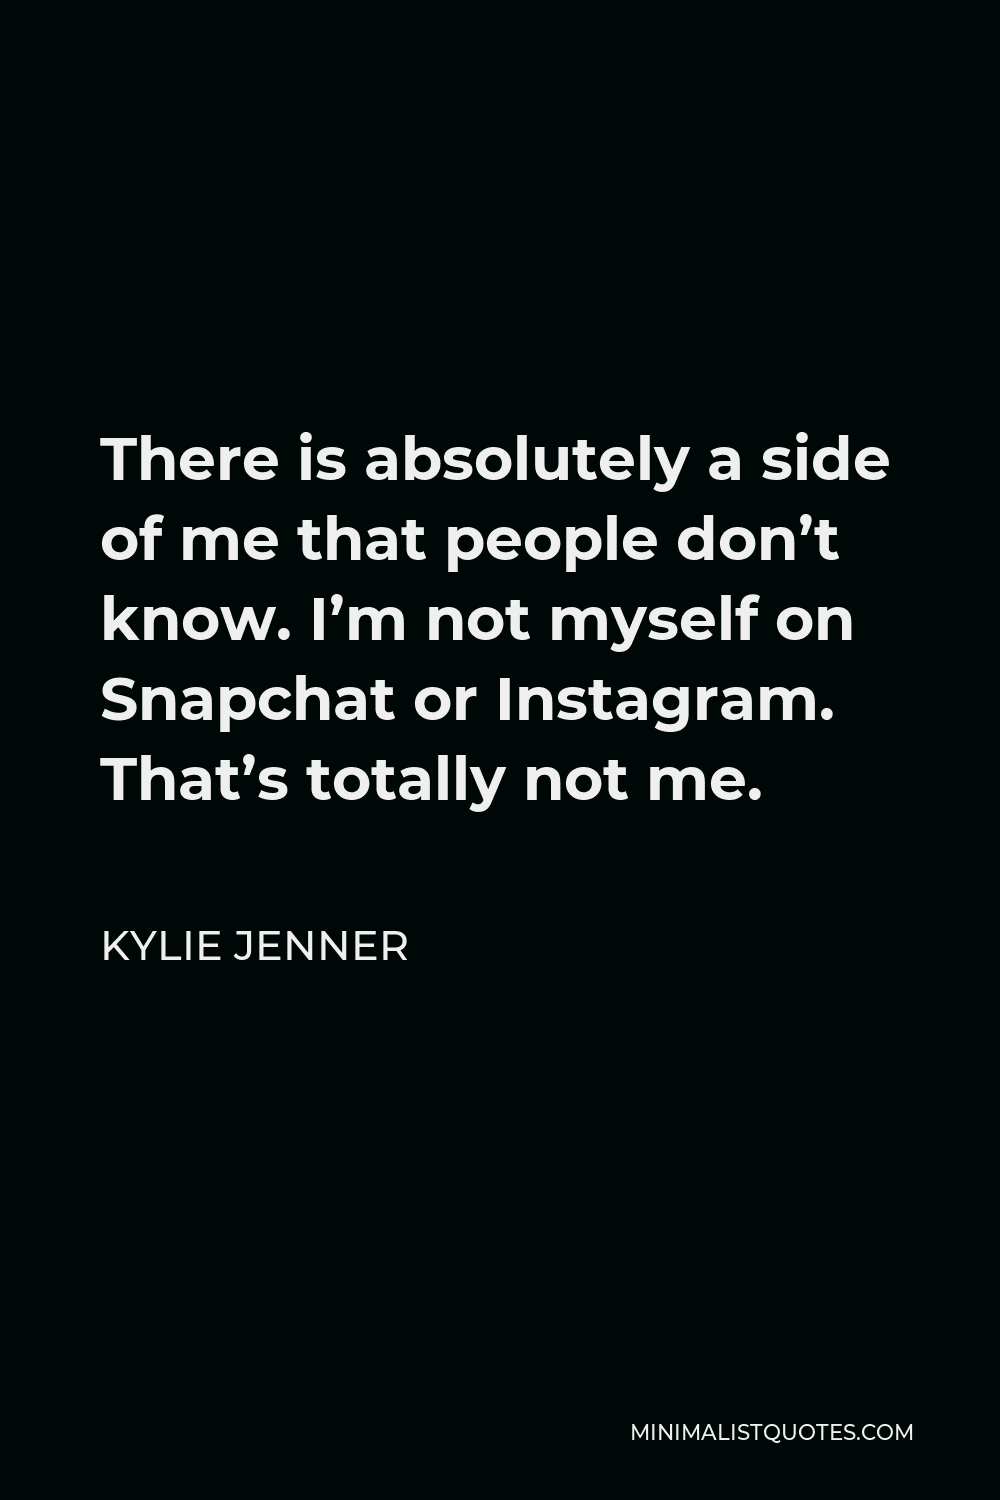 Kylie Jenner Quote - There is absolutely a side of me that people don’t know. I’m not myself on Snapchat or Instagram. That’s totally not me.